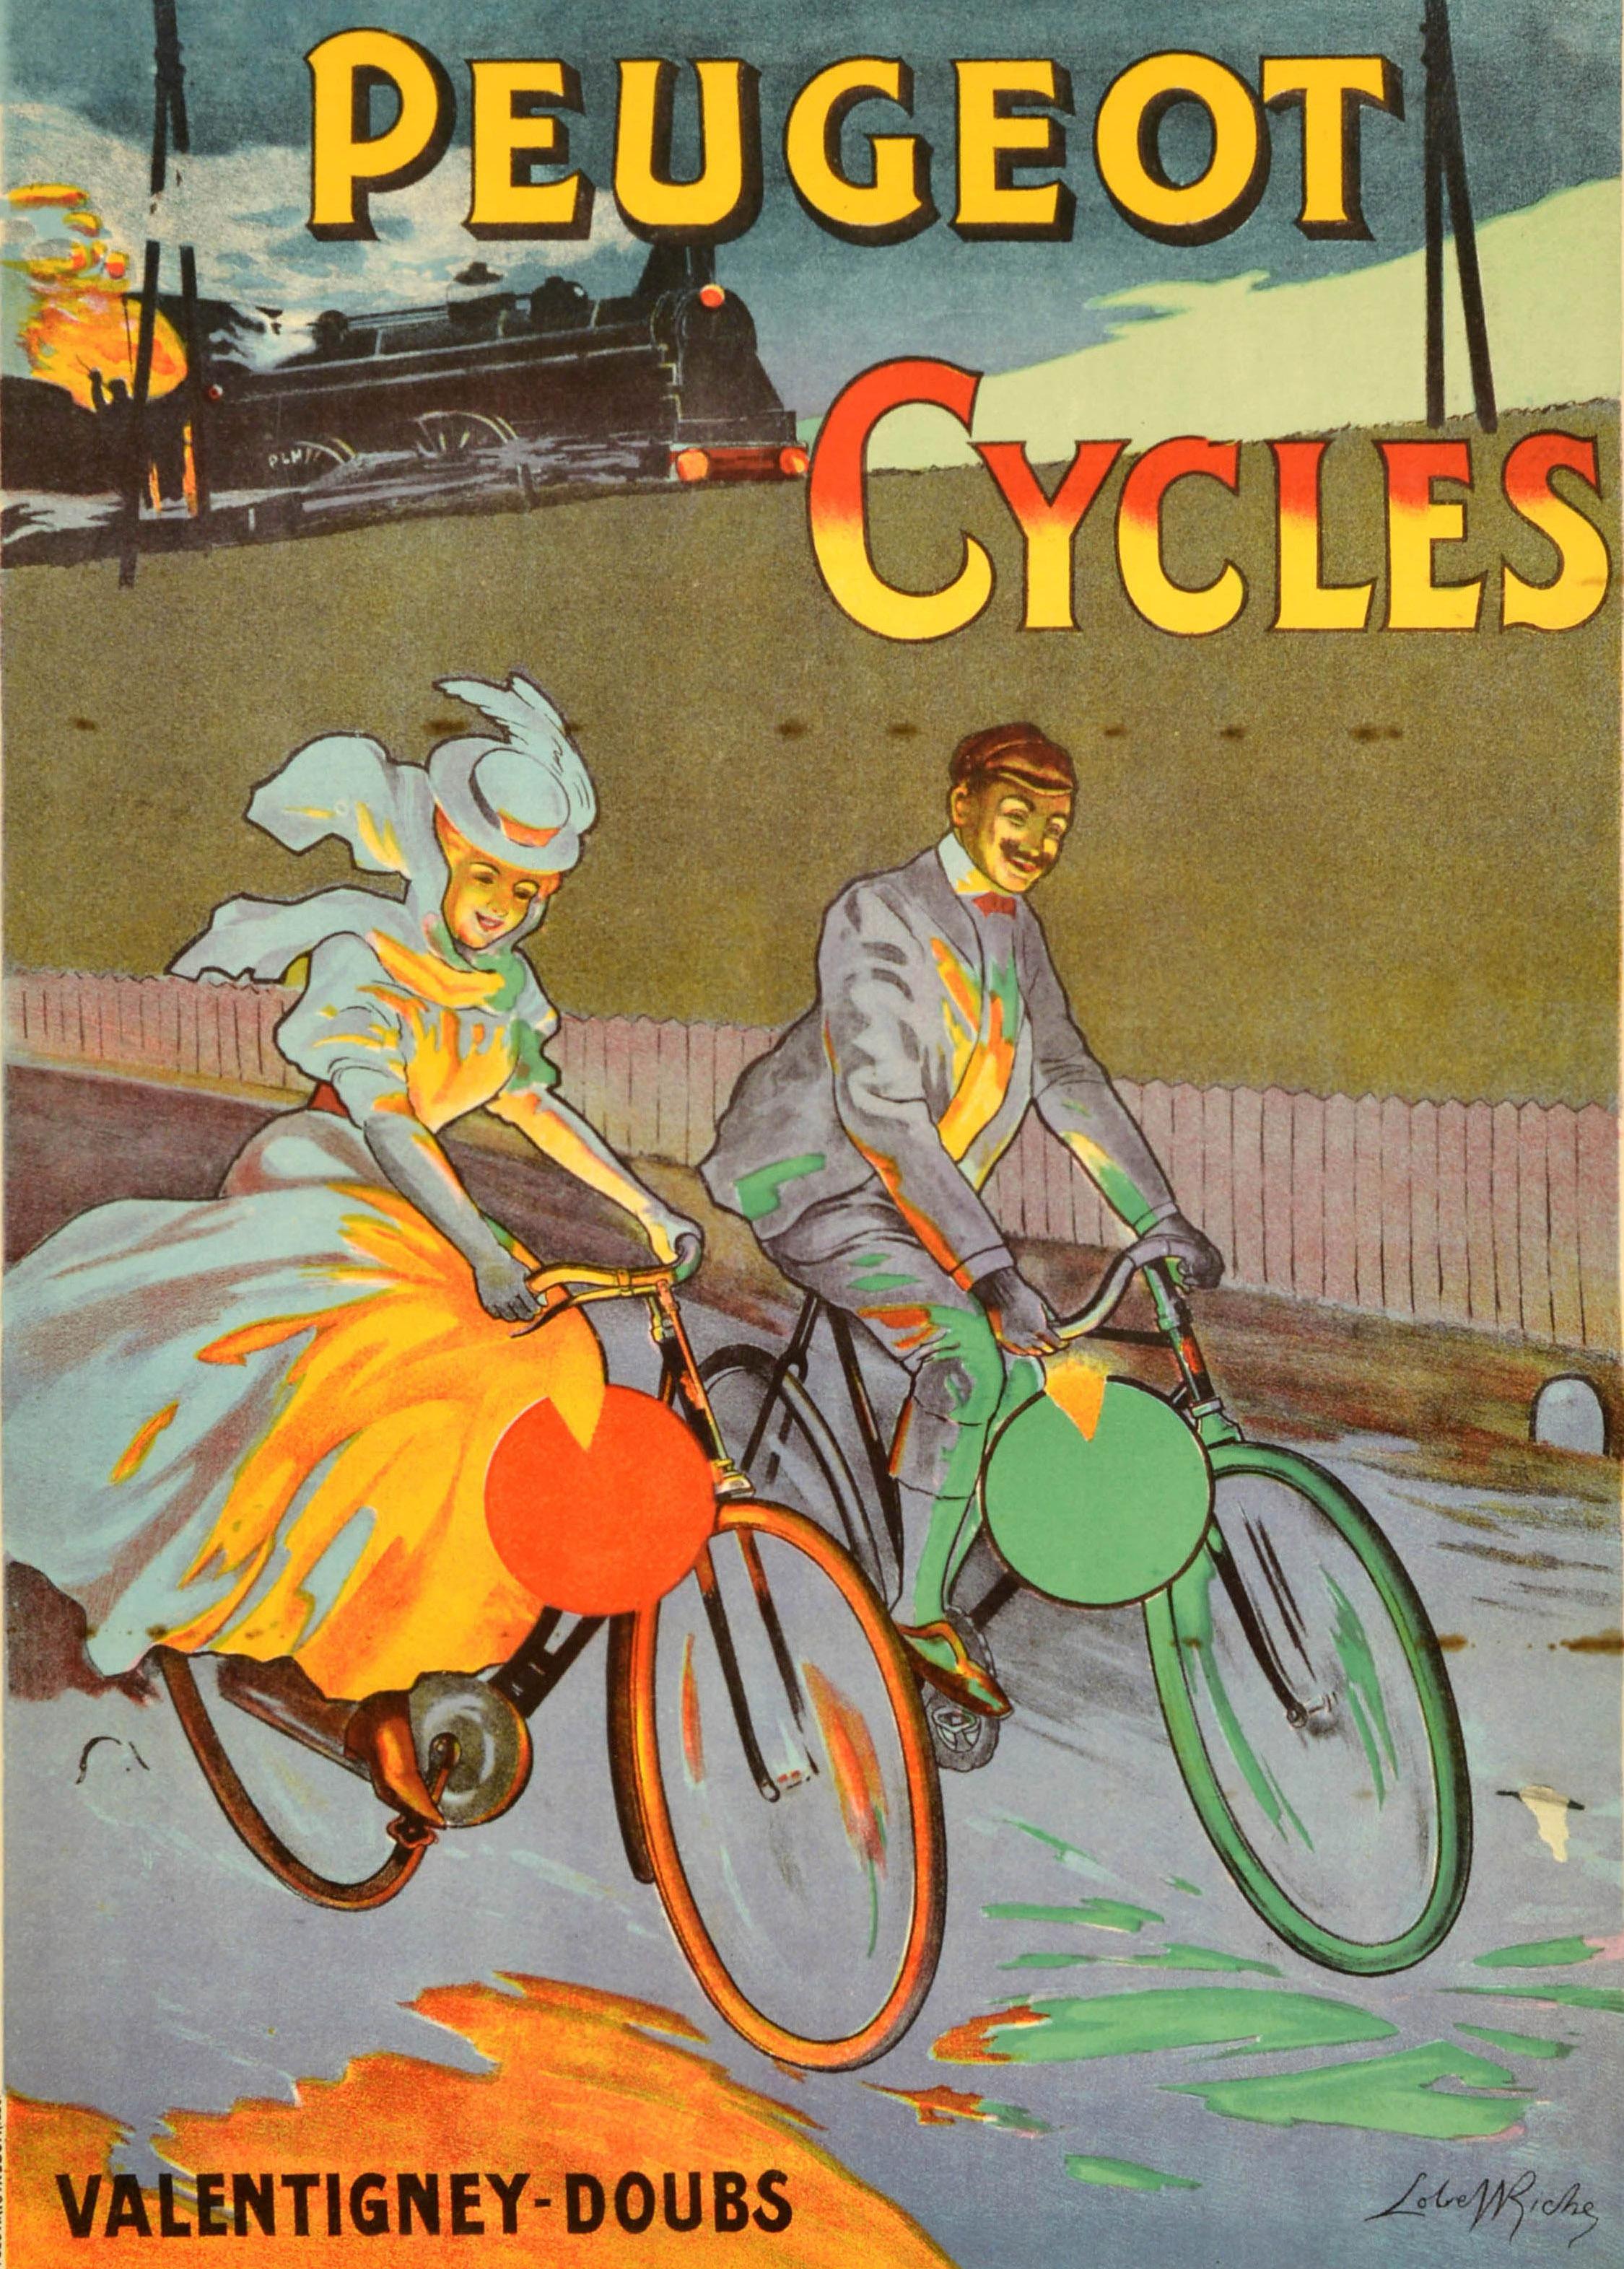 Original Antique Bicycle Advertising Poster Peugeot Cycles Valentigney Doubs - Print by Almery Lobel-Riche